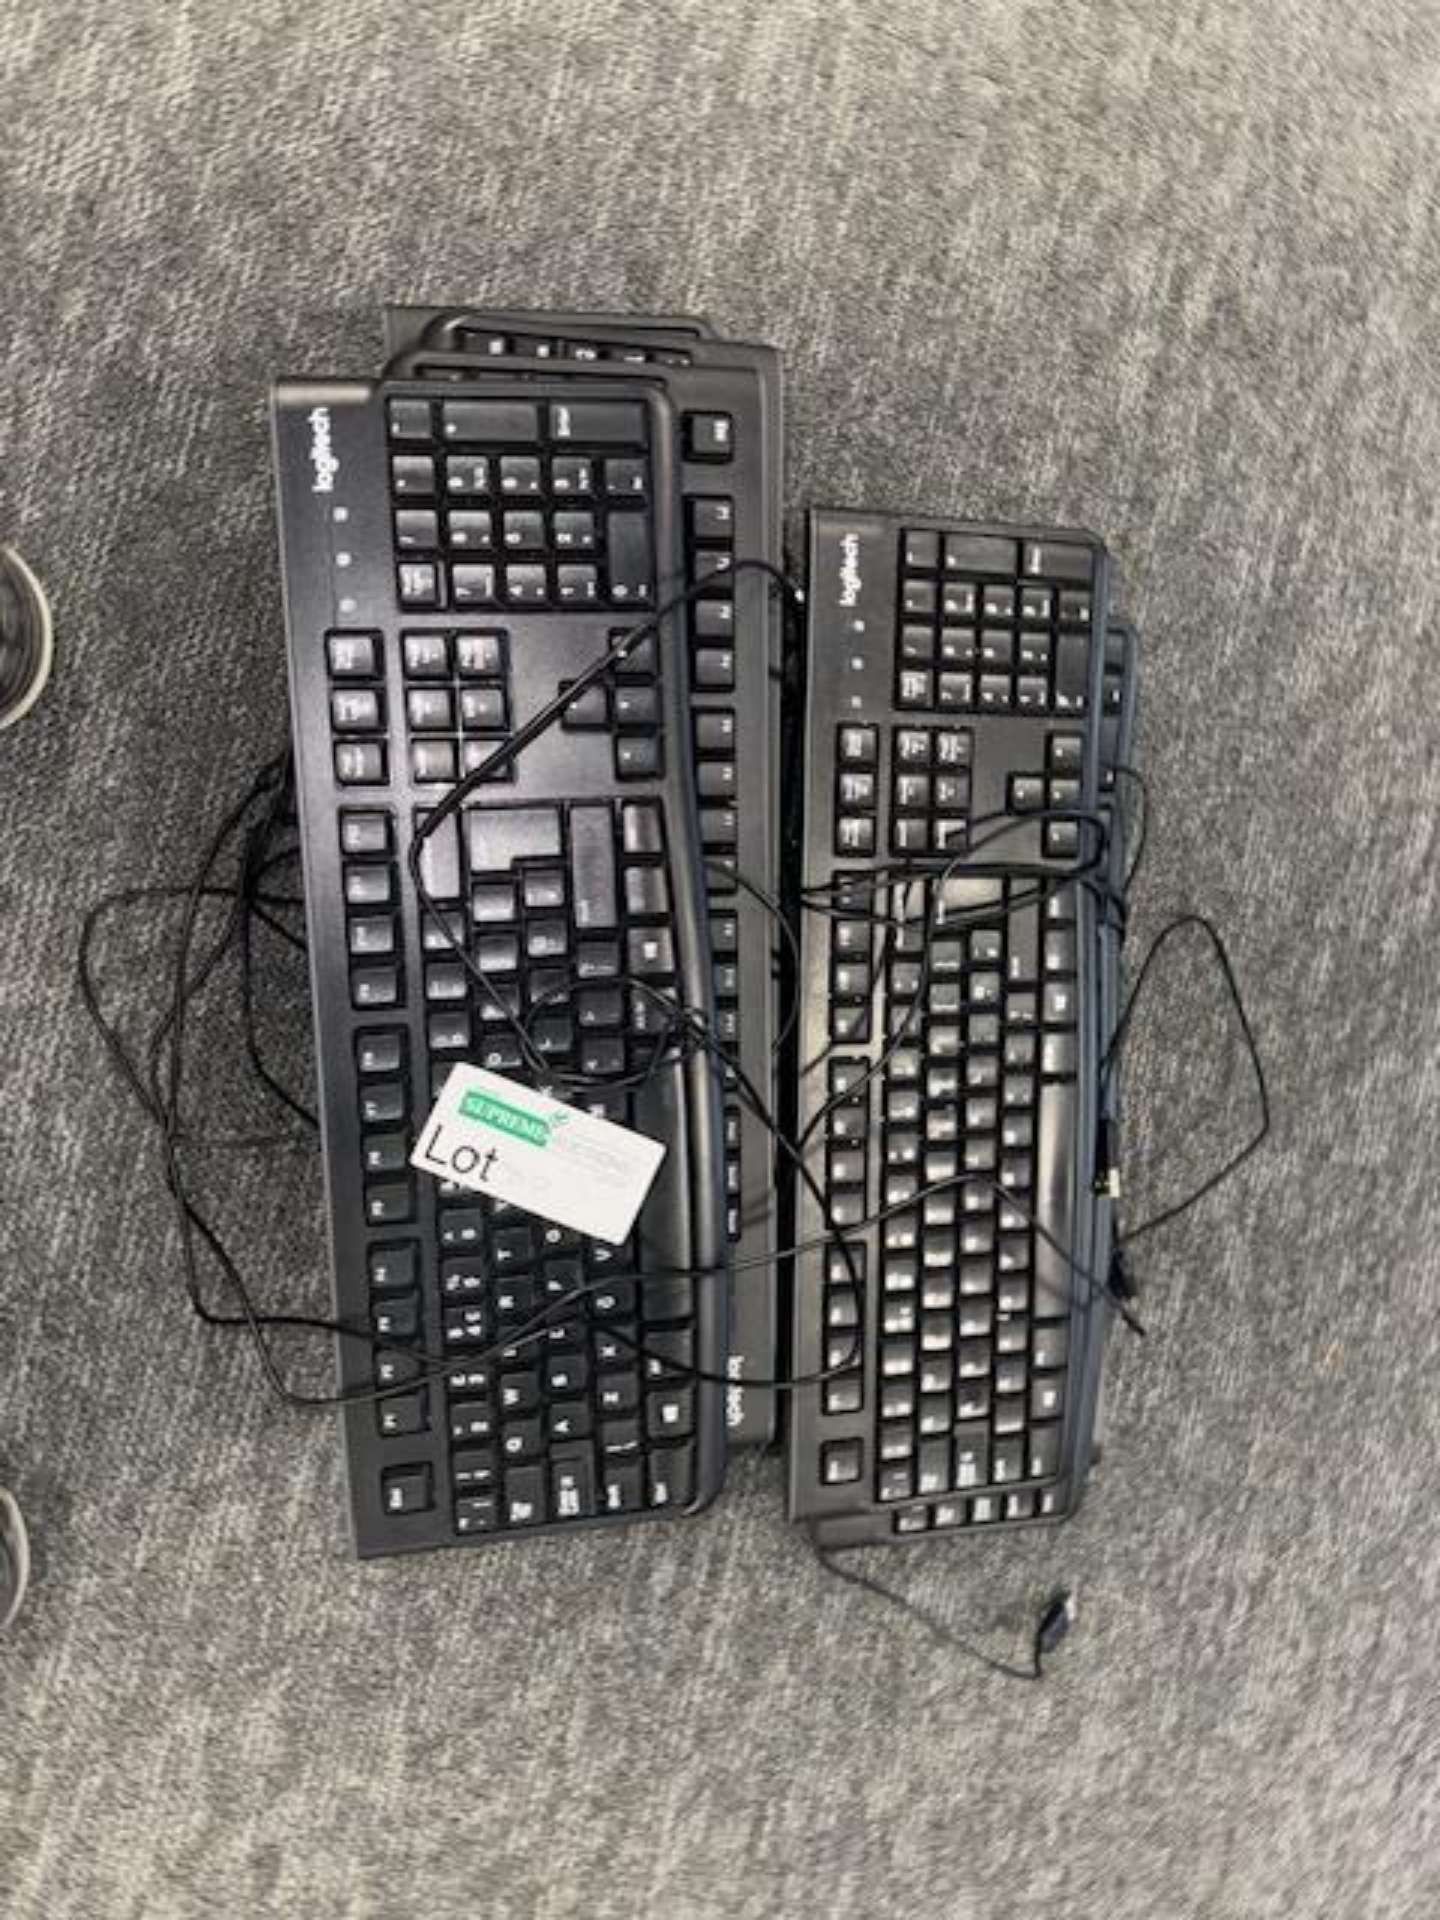 10 X LOGITECH KEYBOARDS (MODELS MAY VARY). (R11/PW)